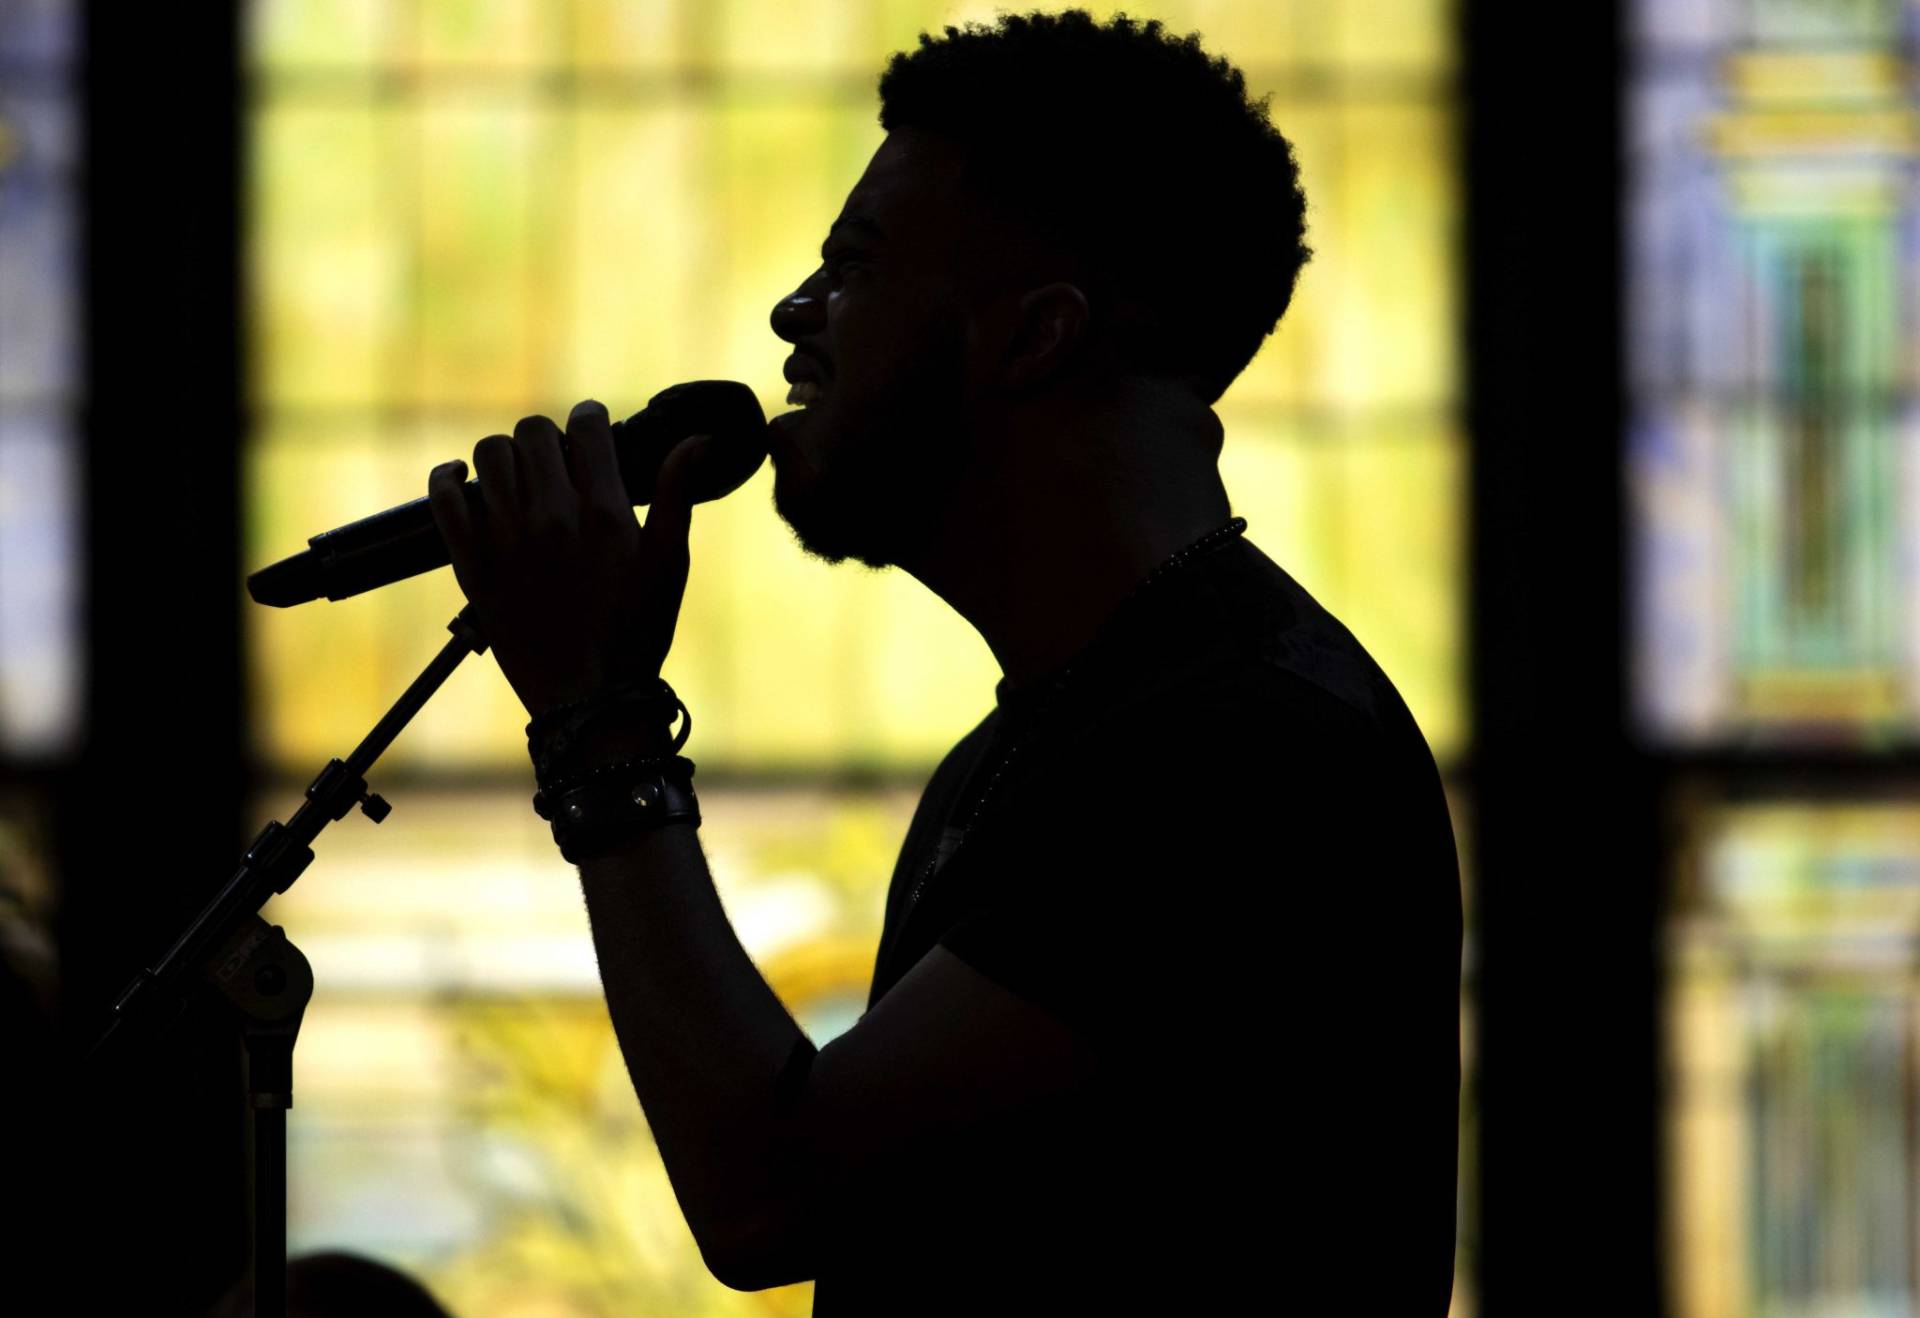 B. Lilly silhouetted against stained glass windows while singing into a microphone.